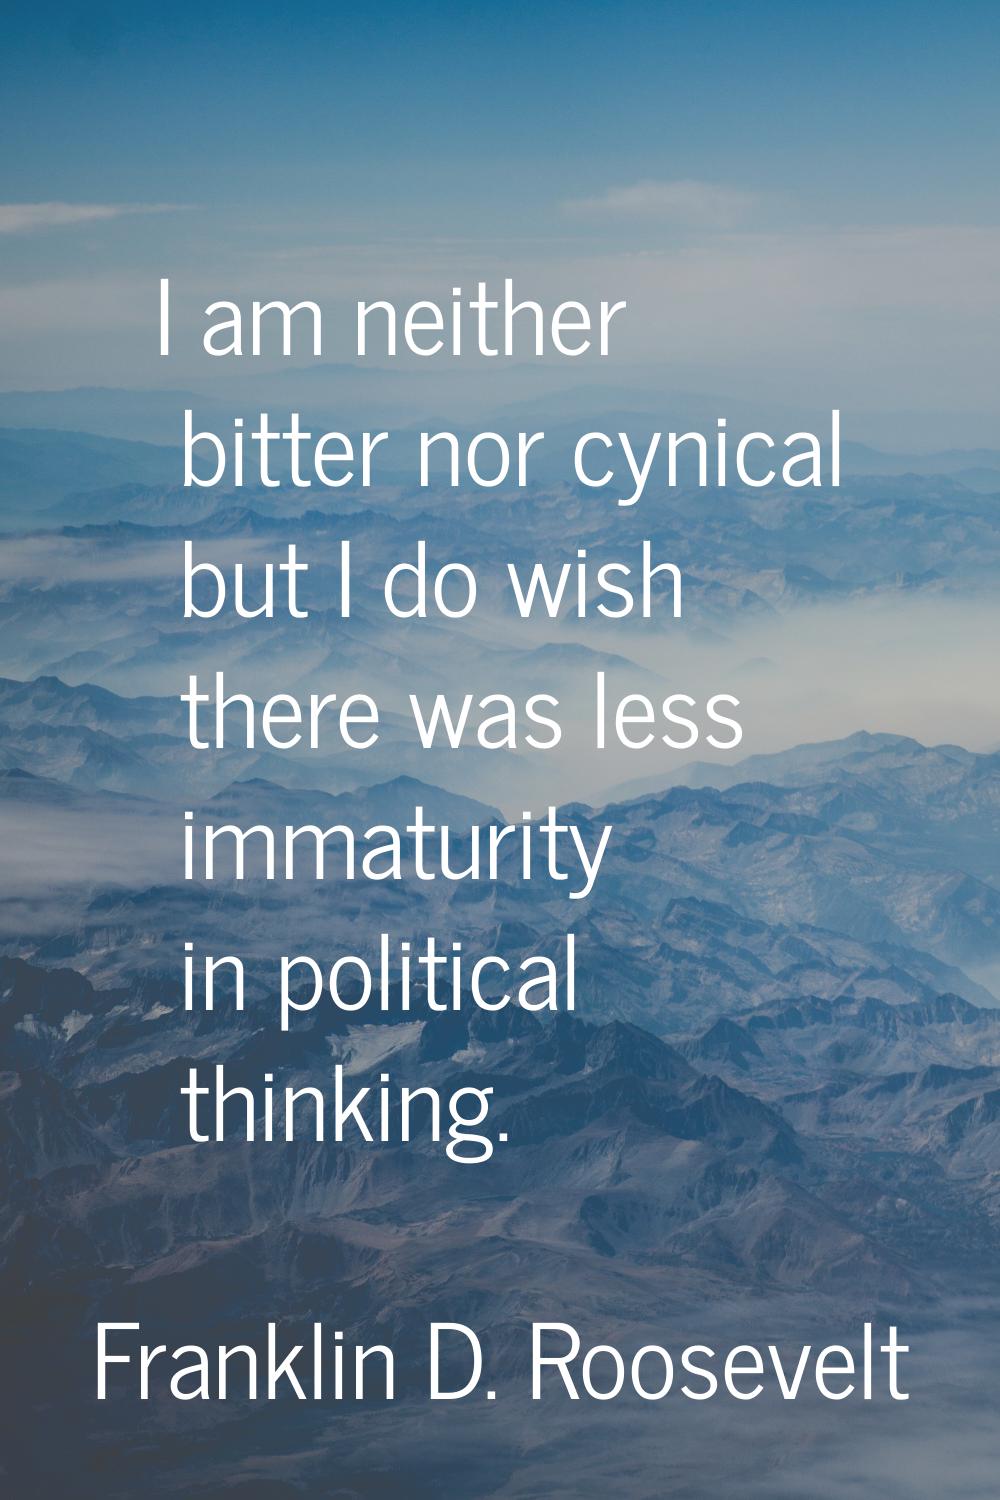 I am neither bitter nor cynical but I do wish there was less immaturity in political thinking.